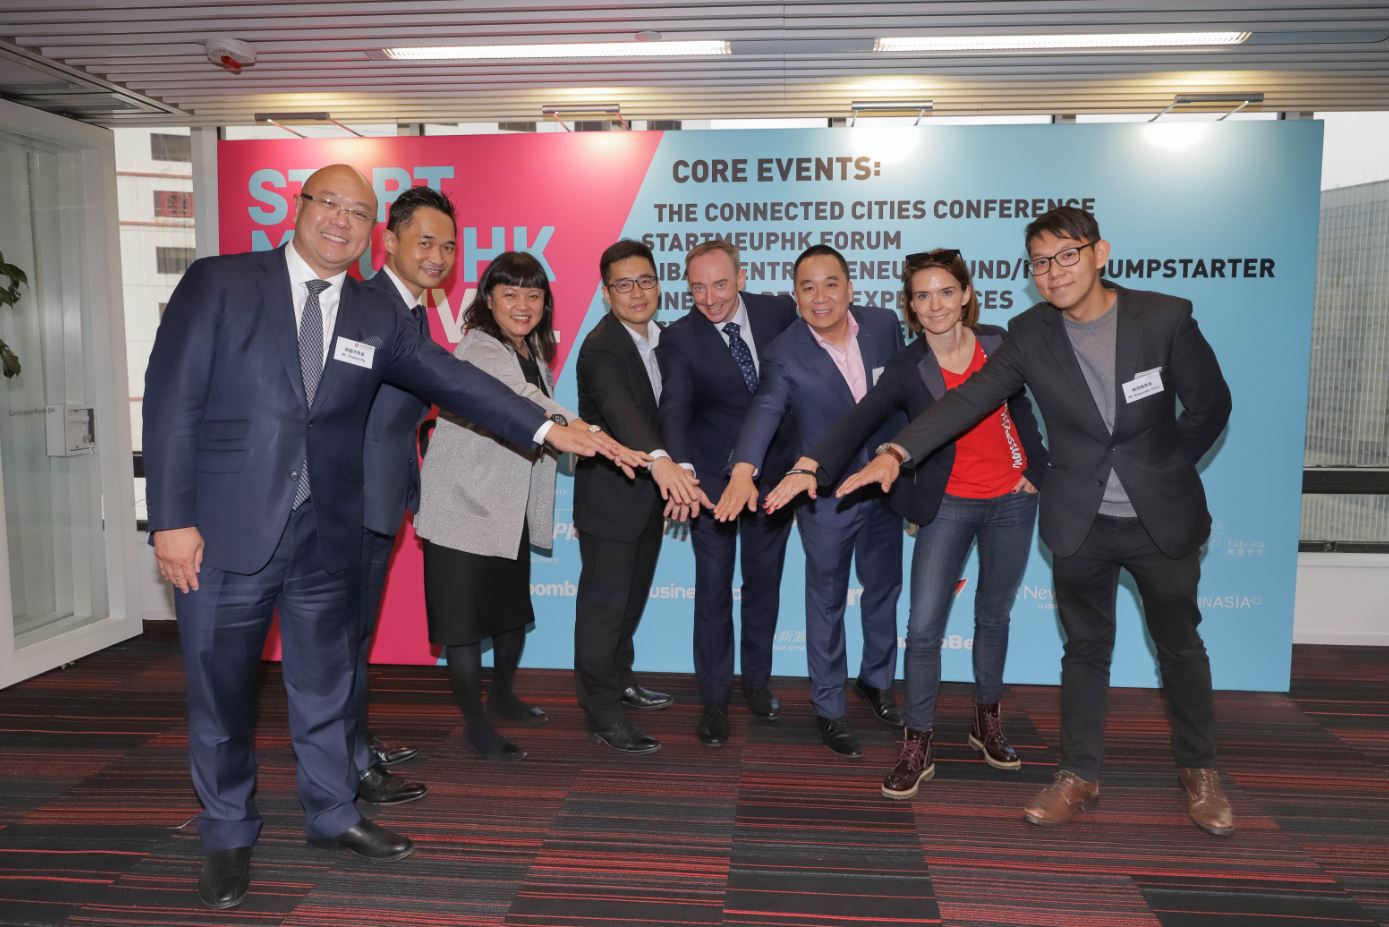 Invest Hong Kong (InvestHK) hosted a media briefing today (20 January 2020) to announce core events of the extended StartmeupHK Festival 2020. From left: Associate Director-General of Investment Promotion at InvestHK Mr Charles Ng; Partner, Smart City Group, KPMG China, Mr Alan Yau; the Head of StartmeupHK at InvestHK, Ms Jayne Chan; the Operations Director of Alibaba Entrepreneurs Fund, Mr Teddy Lui; the Founder and CEO of Bailey Communications HK, Mr Stuart Bailey; the Managing Director of Jumpstart Media, Mr James Kwan; CEO and Co-founder of WHub Ms Karena Belin; and Co-director of the Mills Fabrica Mr Alexander Chan join hands to announce the details of the StartmeupHK Festival 2020.